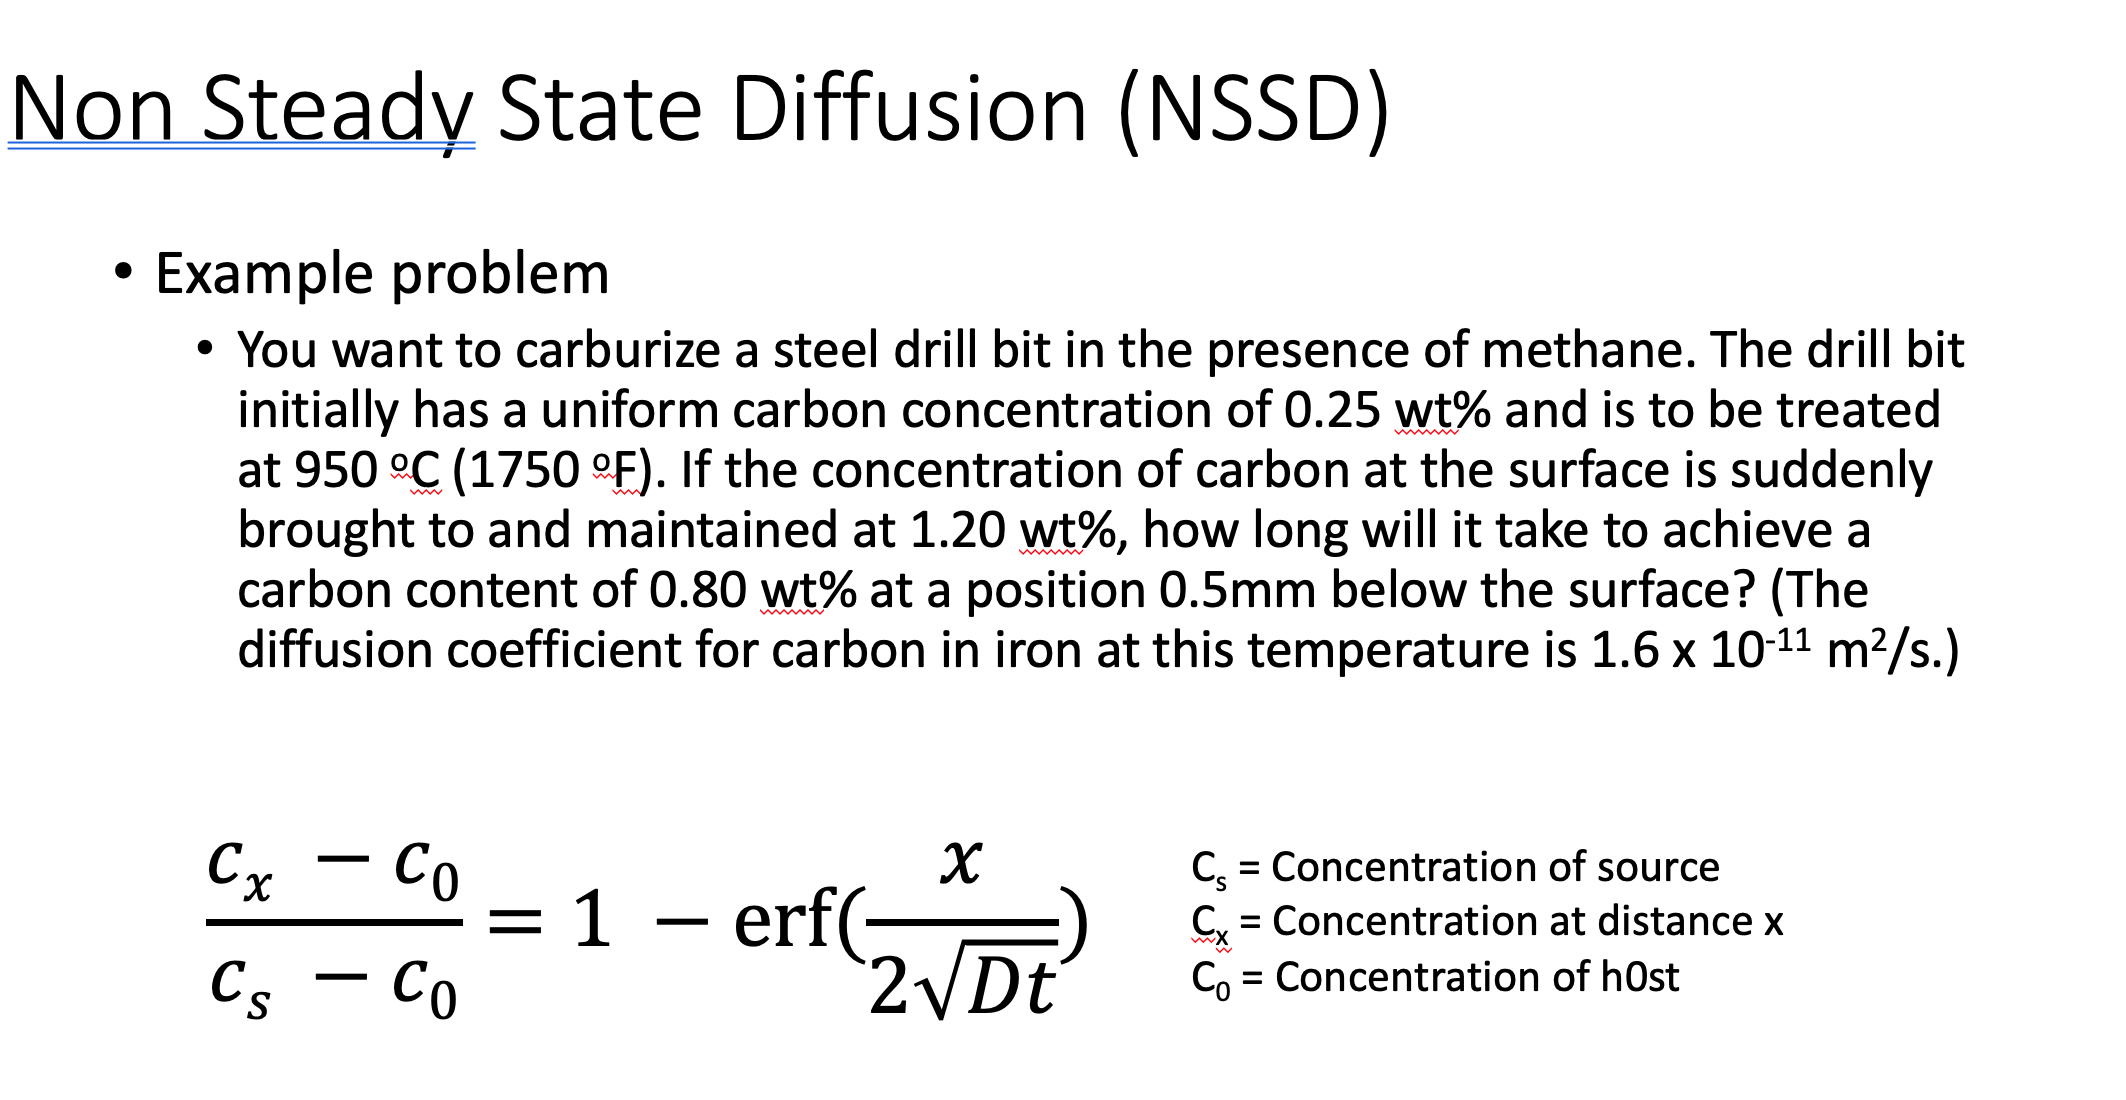 Non Steady State Diffusion (NSSD)
Example problem
• You want to carburize a steel drill bit in the presence of methane. The drill bit
initially has a uniform carbon concentration of 0.25 wt% and is to be treated
at 950 °C (1750 °F). If the concentration of carbon at the surface is suddenly
brought to and maintained at 1.20 wt%, how long will it take to achieve a
carbon content of 0.80 wt% at a position 0.5mm below the surface? (The
diffusion coefficient for carbon in iron at this temperature is 1.6 x 10-11 m2/s.)
Cx – Co
х
C = Concentration of source
= 1 – erf(-
- Co
= Concentration at distance x
Cs
C, = Concentration of h0st
%3D
